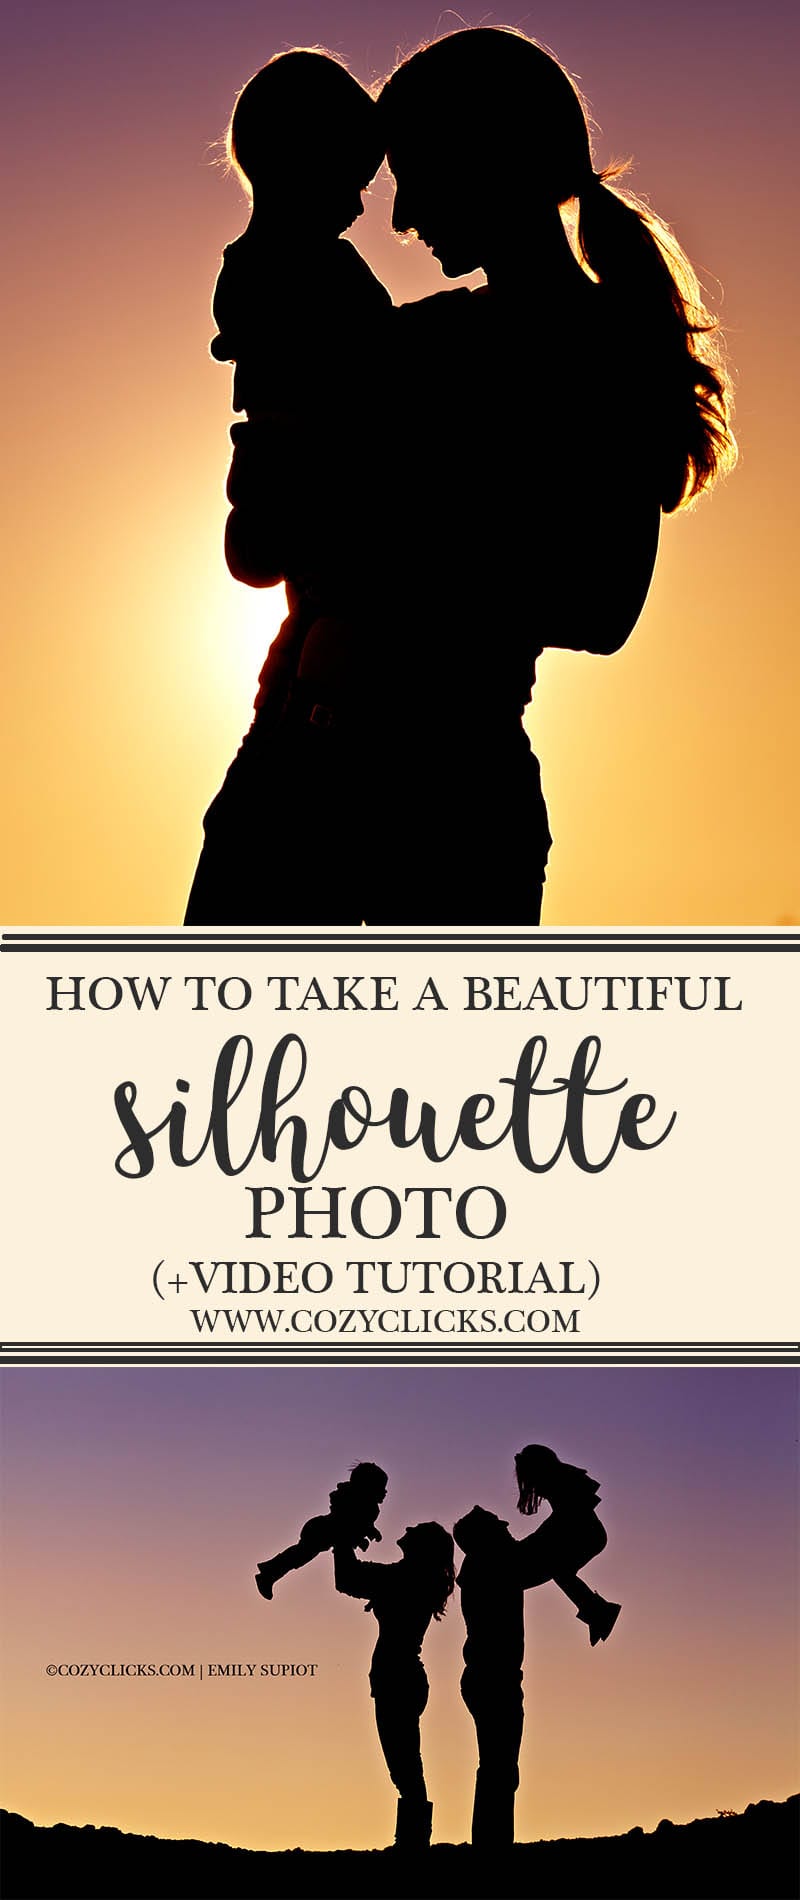 Do you want to know how to take a beautiful silhouette photo? Read here to see how and see a bonus video tutorial!